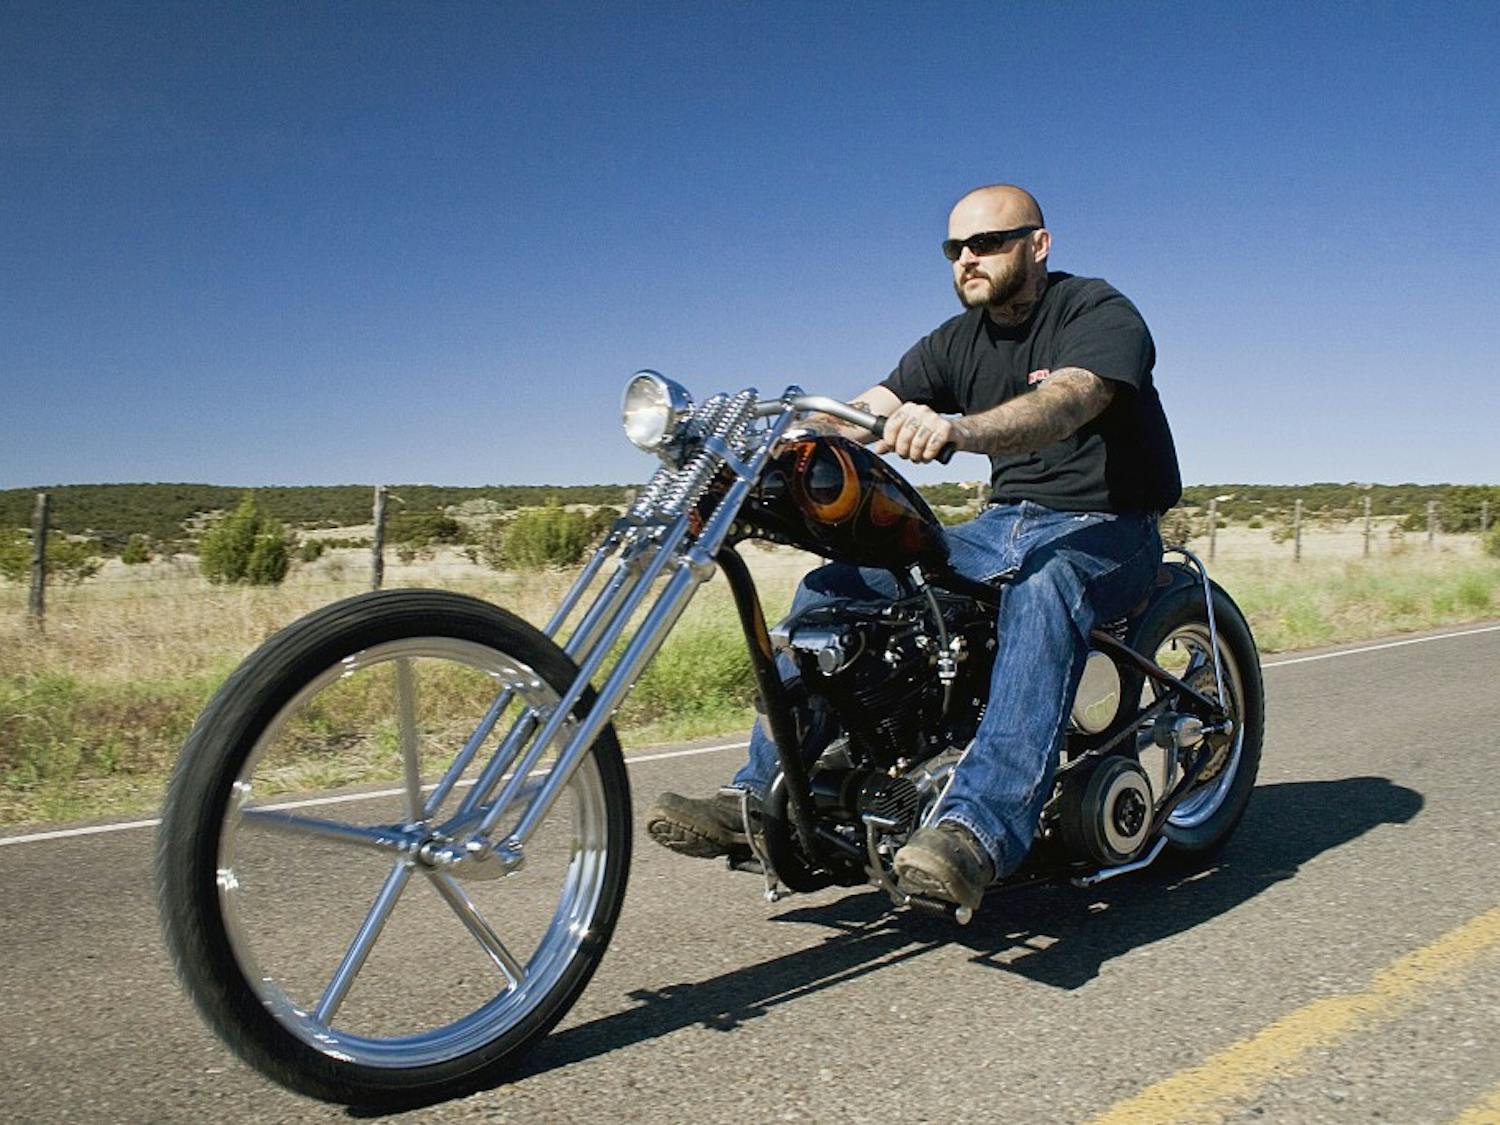 	Trent Schara rides his custom Harley down Highway 317. Schara builds bikes at Atomic Custom, his shop. Check out the Multimedia page at DailyLobo.com to watch ‘Grease,’ the second episode in the ‘Shop talk’ series by Joey Trisolini.